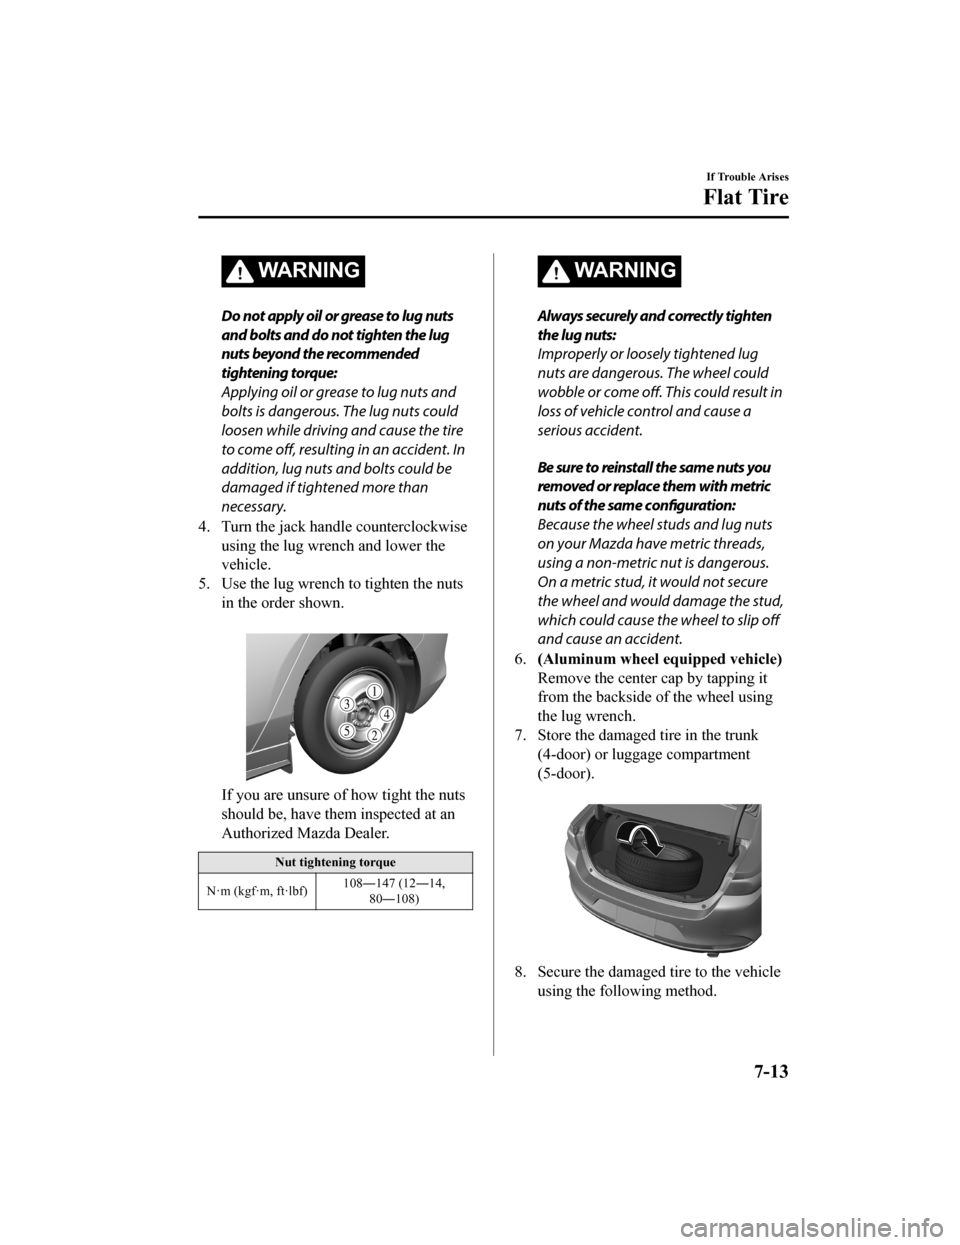 MAZDA MODEL 3 HATCHBACK 2020  Owners Manual (in English) WA R N I N G
Do not apply oil or grease to lug nuts
and bolts and do not tighten the lug
nuts beyond the recommended
tightening torque:
Applying oil or grease to lug nuts and
bolts is dangerous. The l